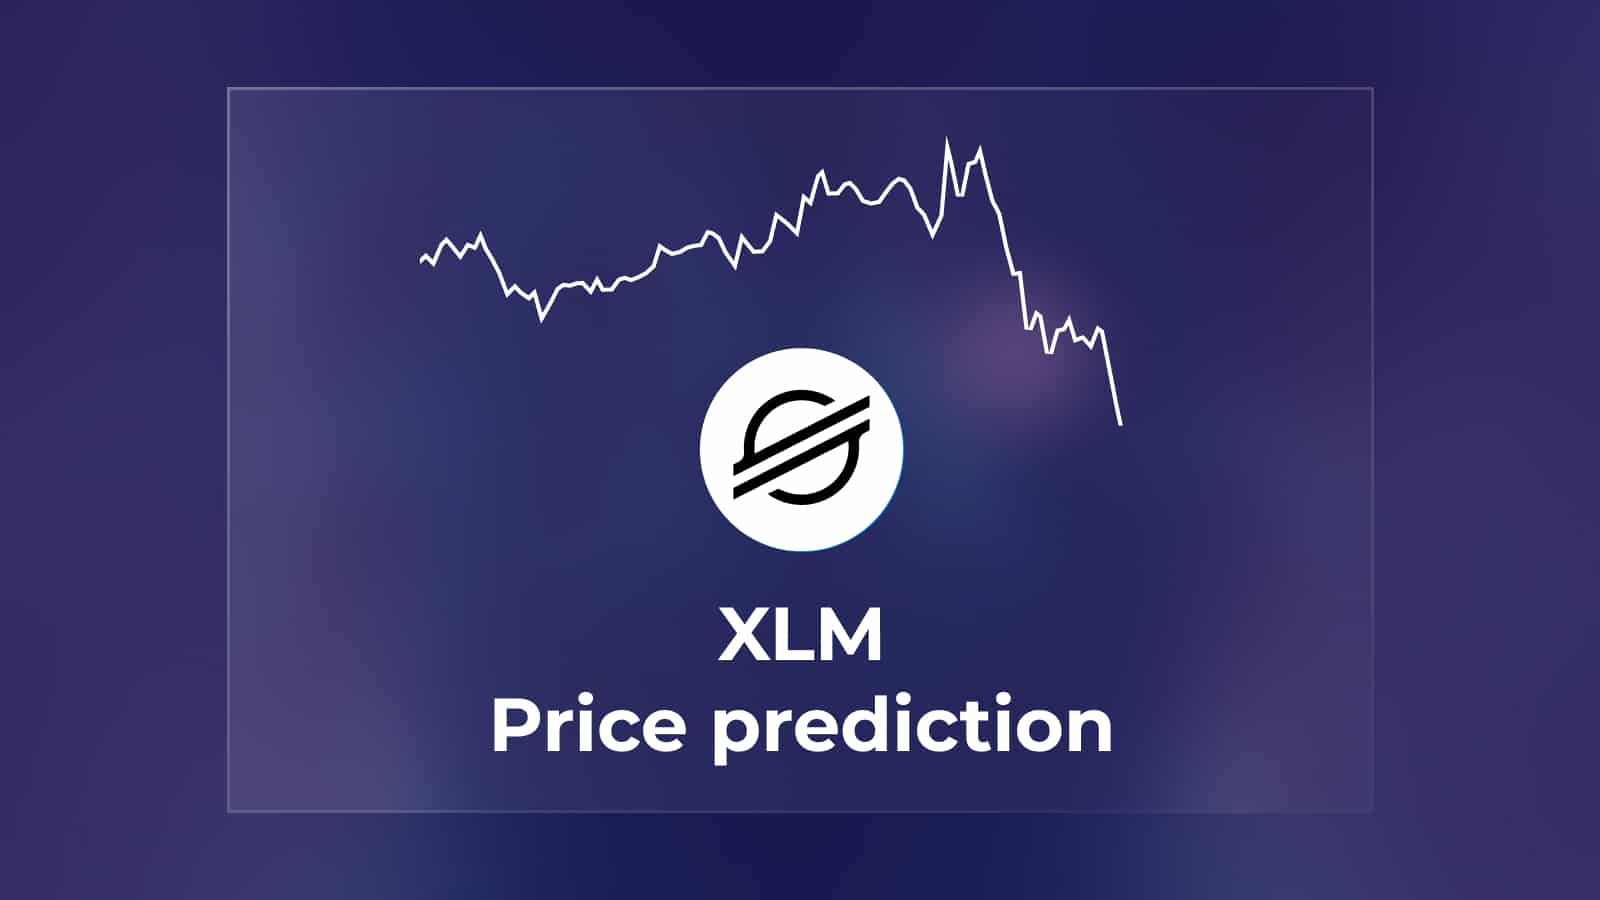 Xlm Price Prediction Featured Image